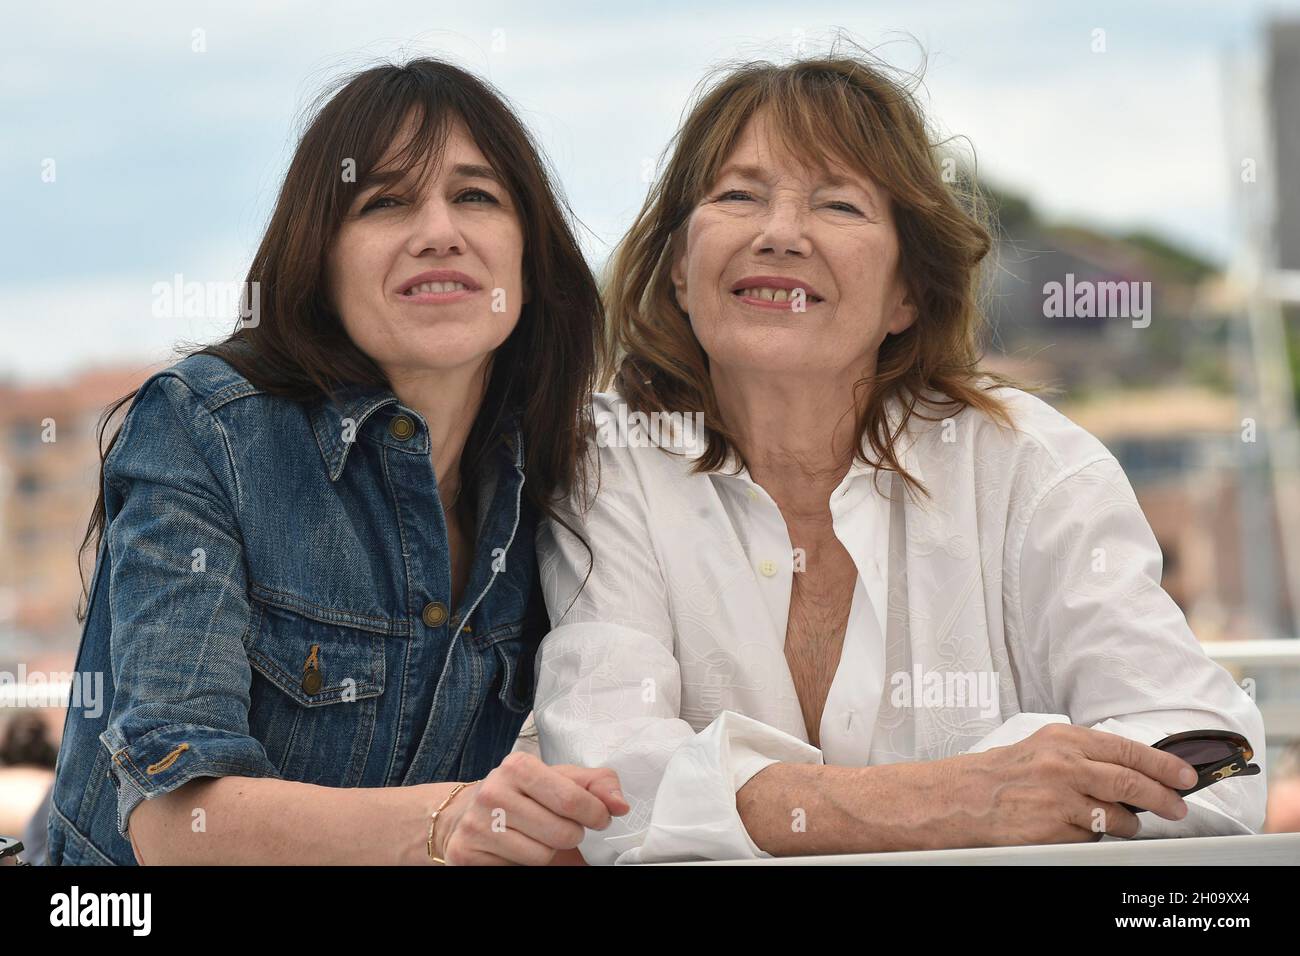 74th edition of the Cannes Film Festival: Jane Birkin and Charlotte Gainsbourg posing during a photocall for the film “Jane by Charlotte” (French: “Ja Stock Photo